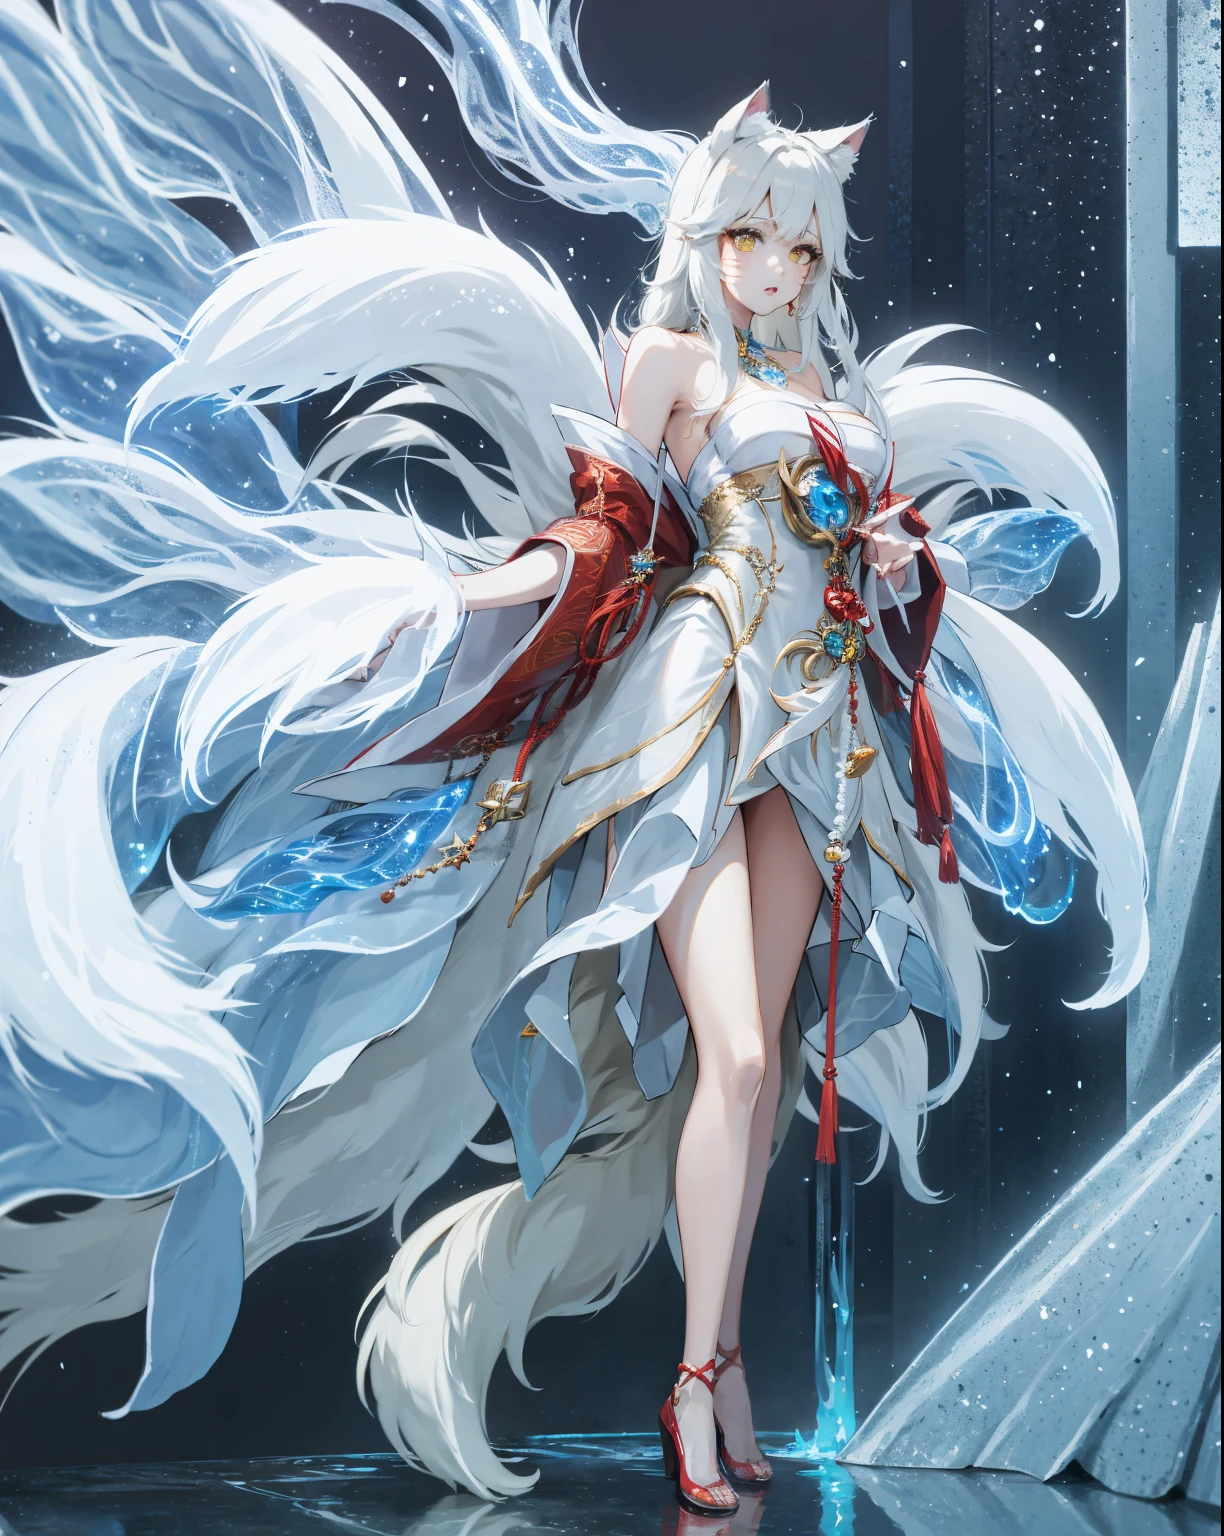 1 plump girl, Full body standing painting, solo, fox ear, fox tails, Gorgeous white dress, oda, Tanuki League of Legends,